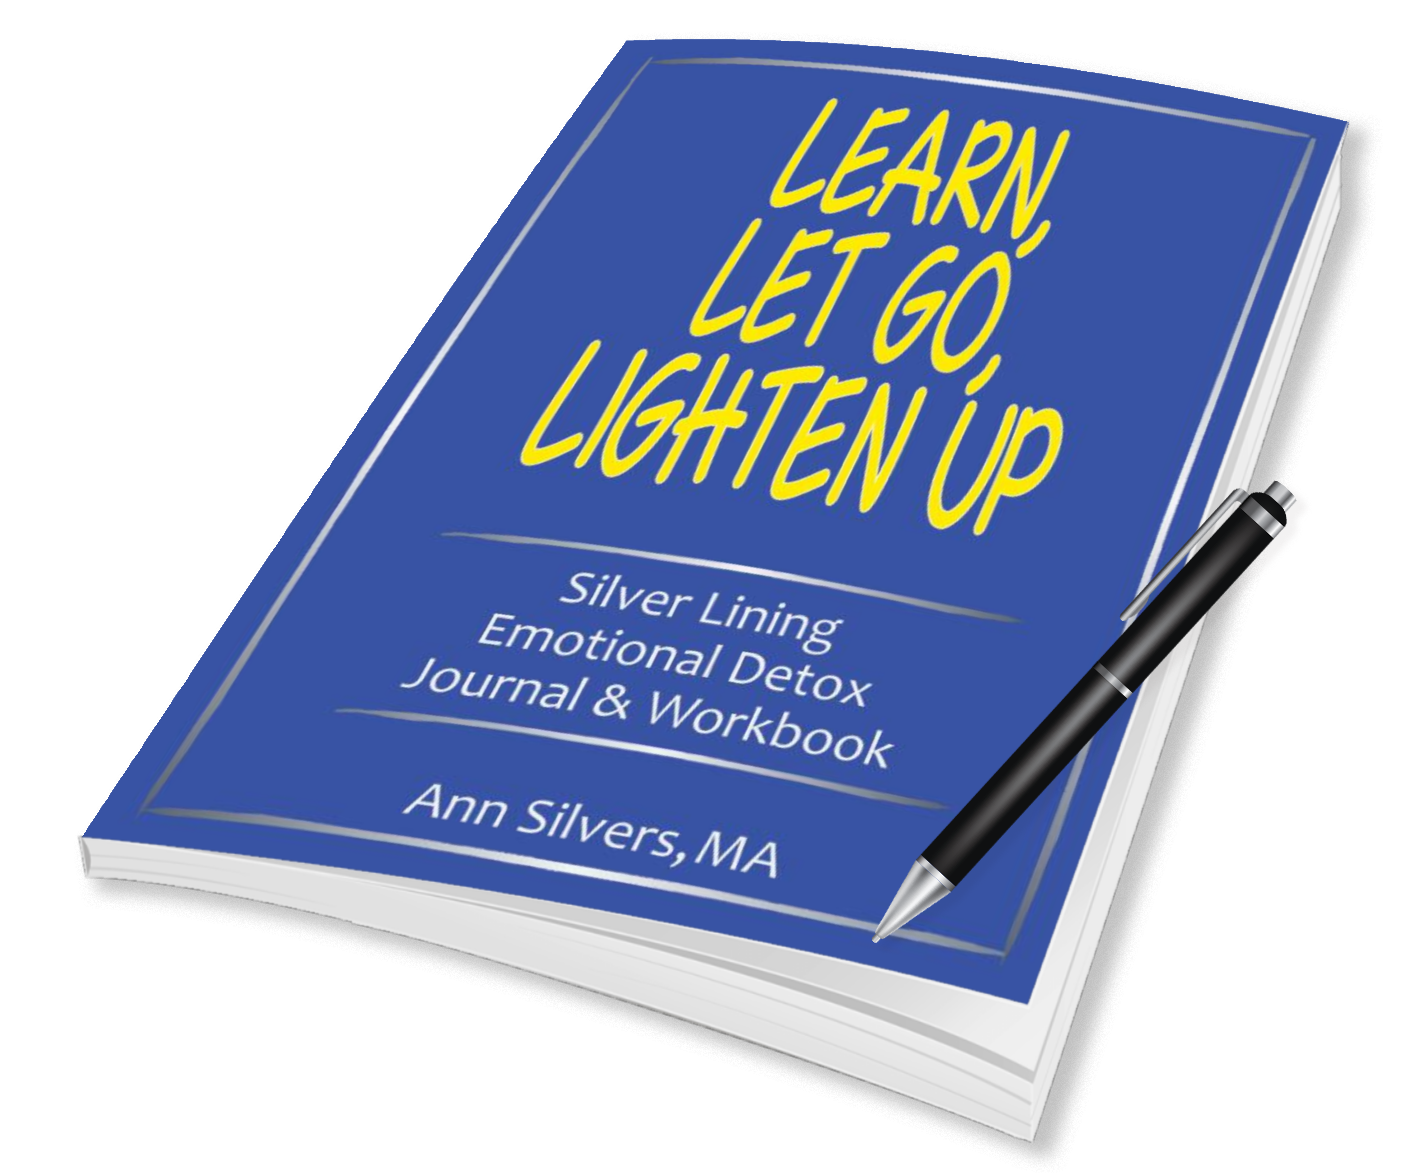 Learn, Let Go, Lighten Up: Silver Lining Emotional Detox Journal & Workbook, Journal prompts for writing down your thoughts and feelings